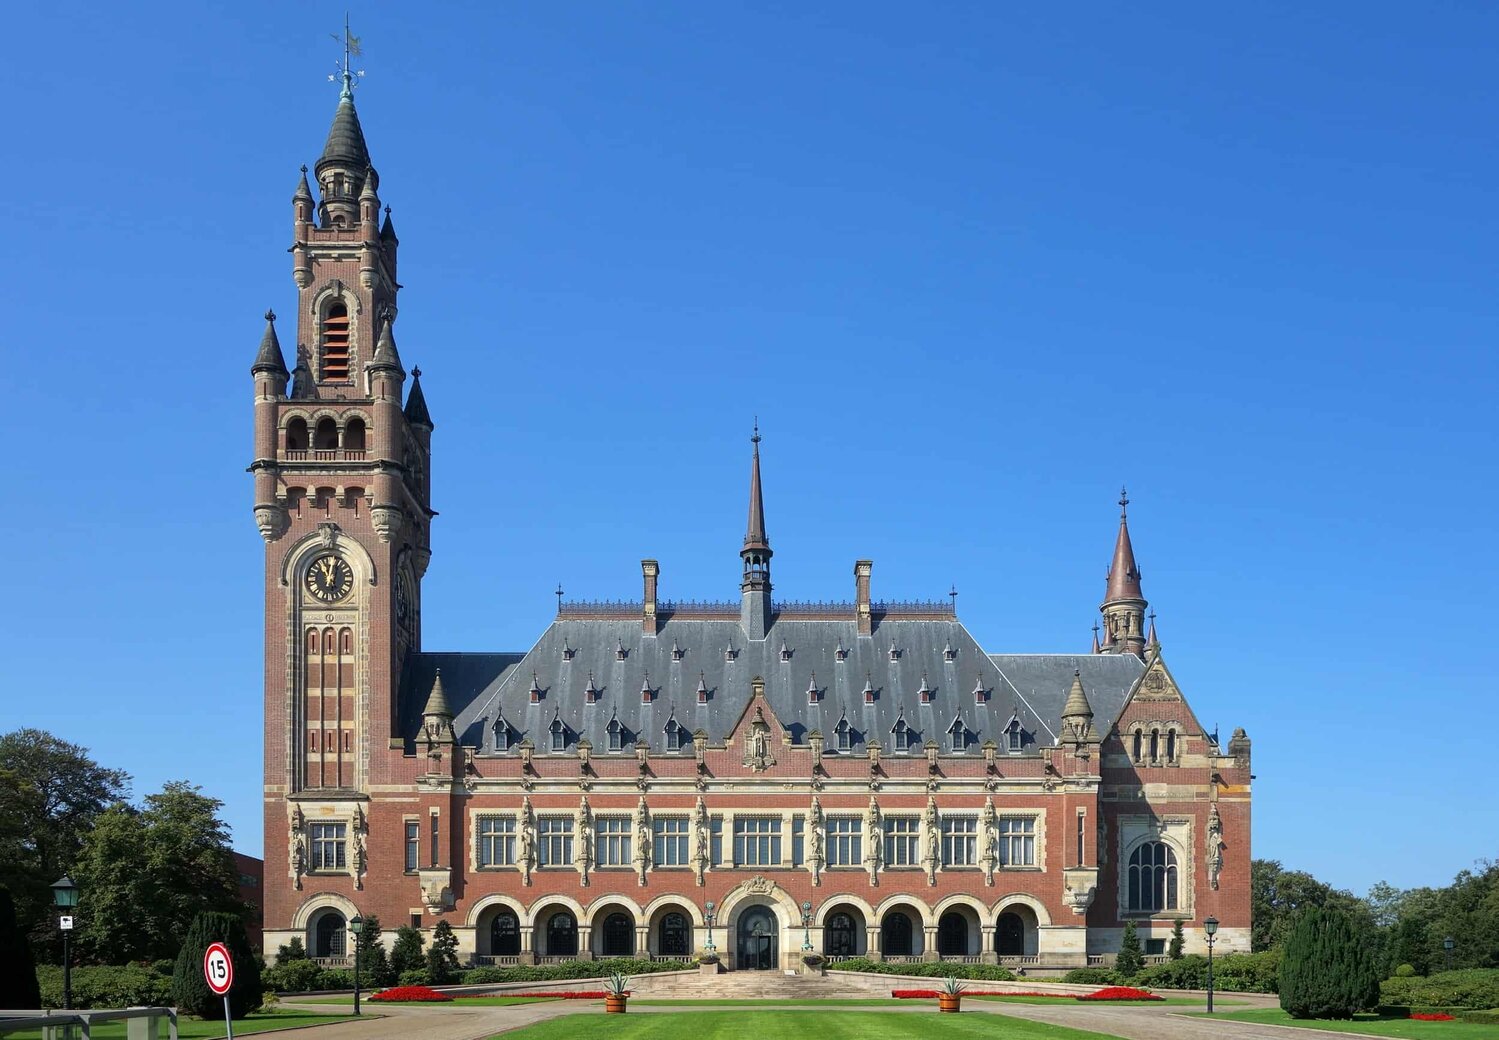 The International Court of Justice in The Hague, Netherlands.